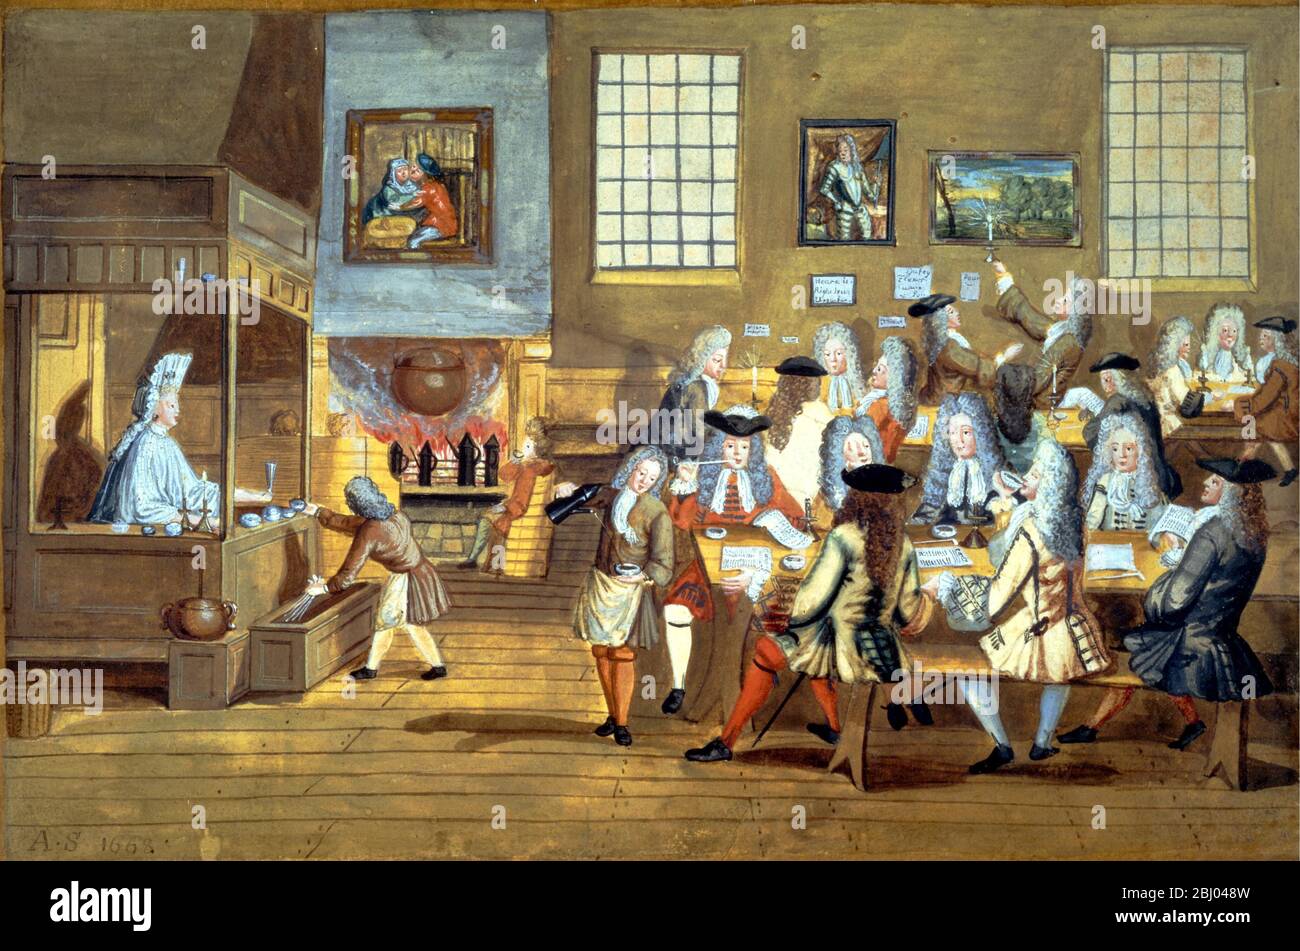 A caricature of Lloyd's Coffee House from the 17th century. Lloyd's of London, which began doing business insuring ship cargo in a dockside Tower Street coffee house in 1688, has been the very symbol of insurance. In London the Coffee House was unique in the extent to which it entrenched itself as an institution in the social, cultural, commercial and political life of the city. Rumours, news and gossip were carried between Coffee Houses by their patrons and sometimes runners would flit from one Coffee House to another within a particular city to report major events such as the outbreak of a w Stock Photo